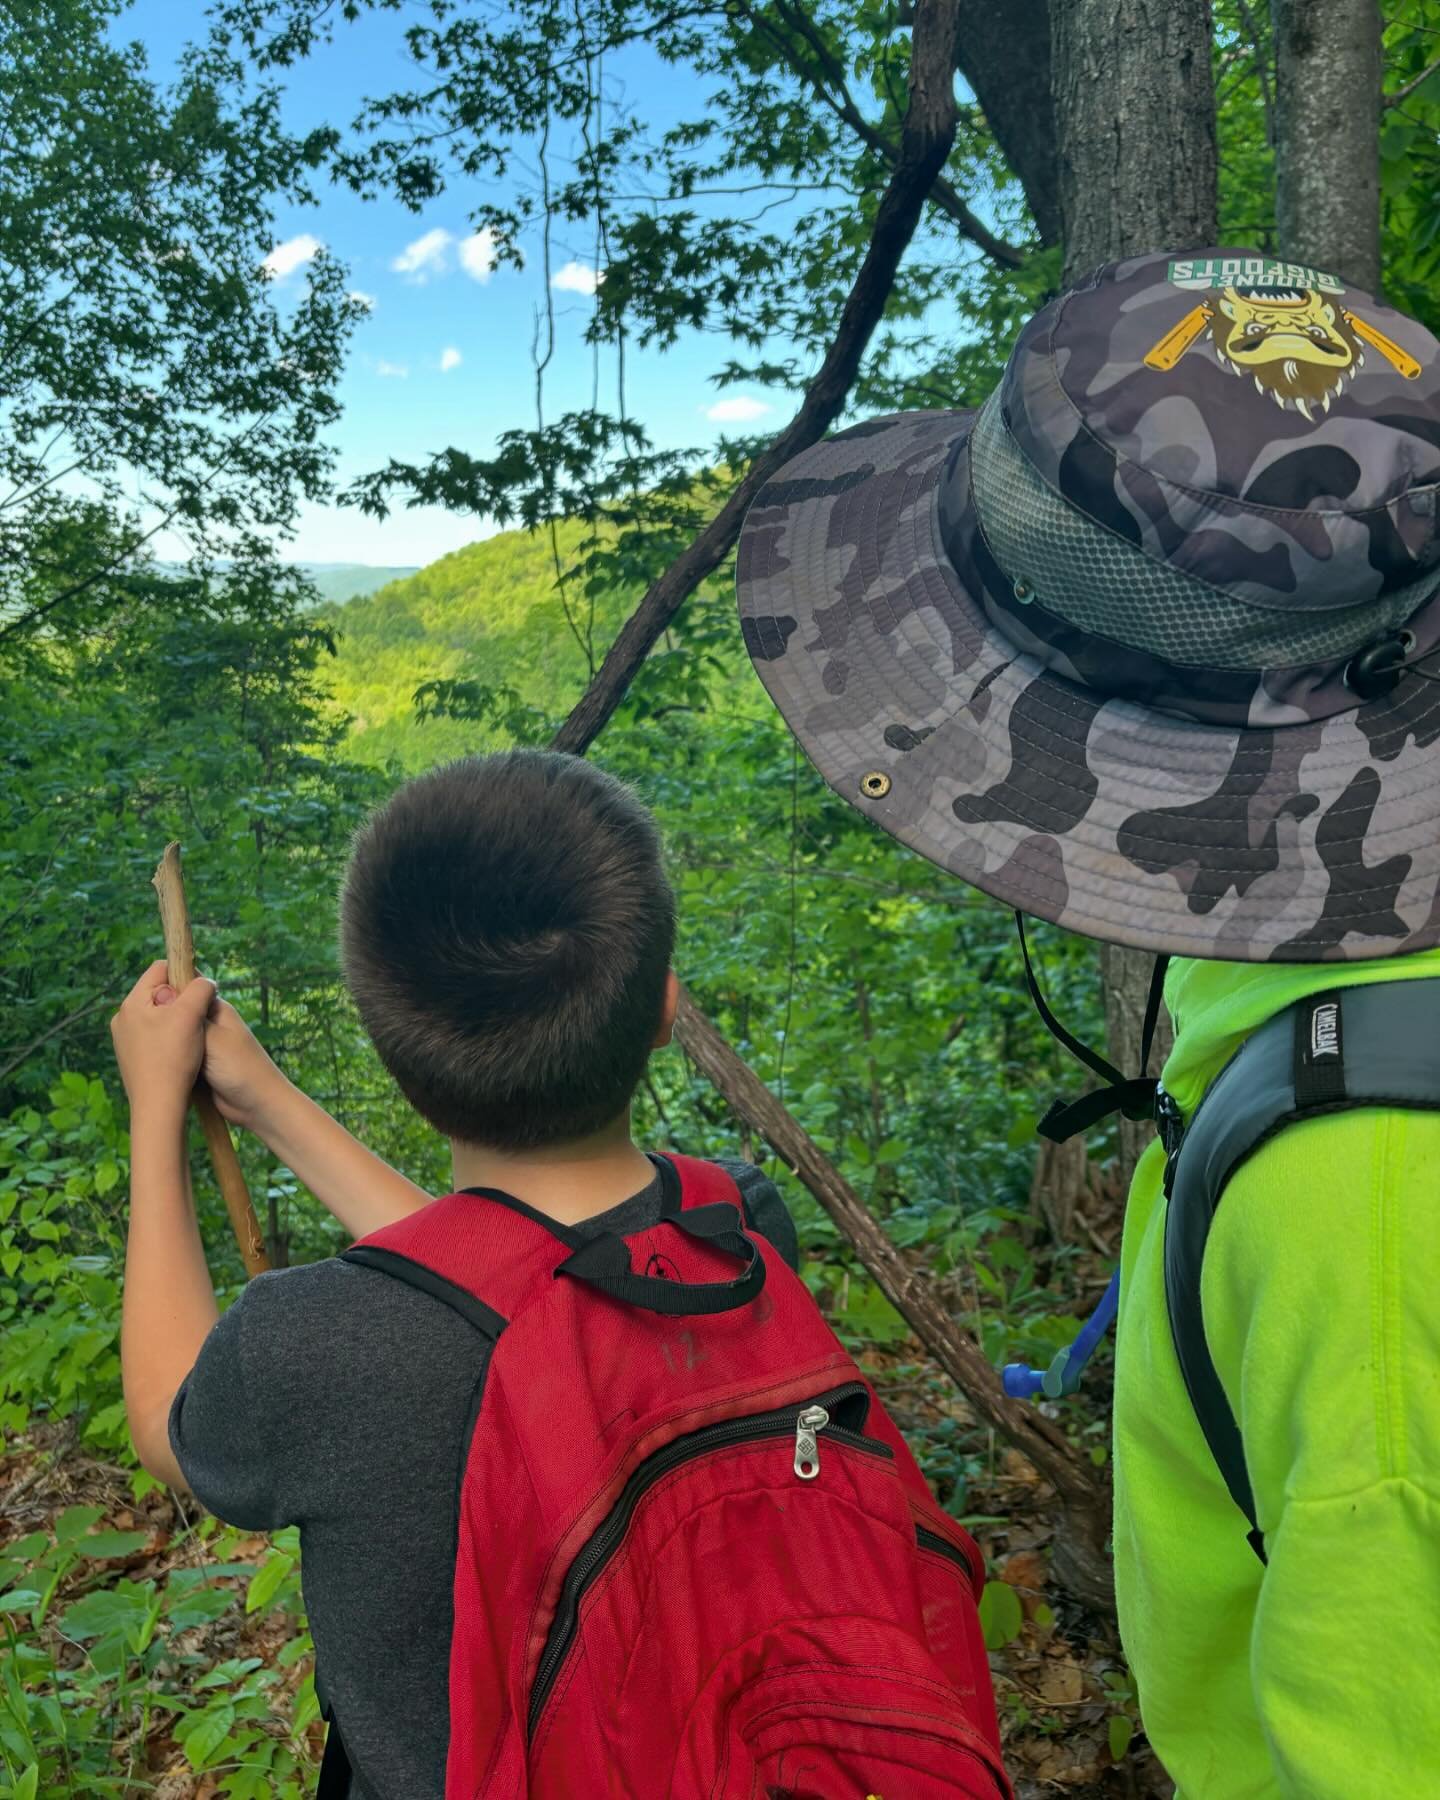 Just another day at the office&hellip;.. exploring, bonding, makin fire, learning wilderness skills, pushing limits!!!!!

Big shout out to these 6th graders. Focusing on challenges, pushing through, developing &ldquo;grit&rdquo;. Great stuff!!!! @two